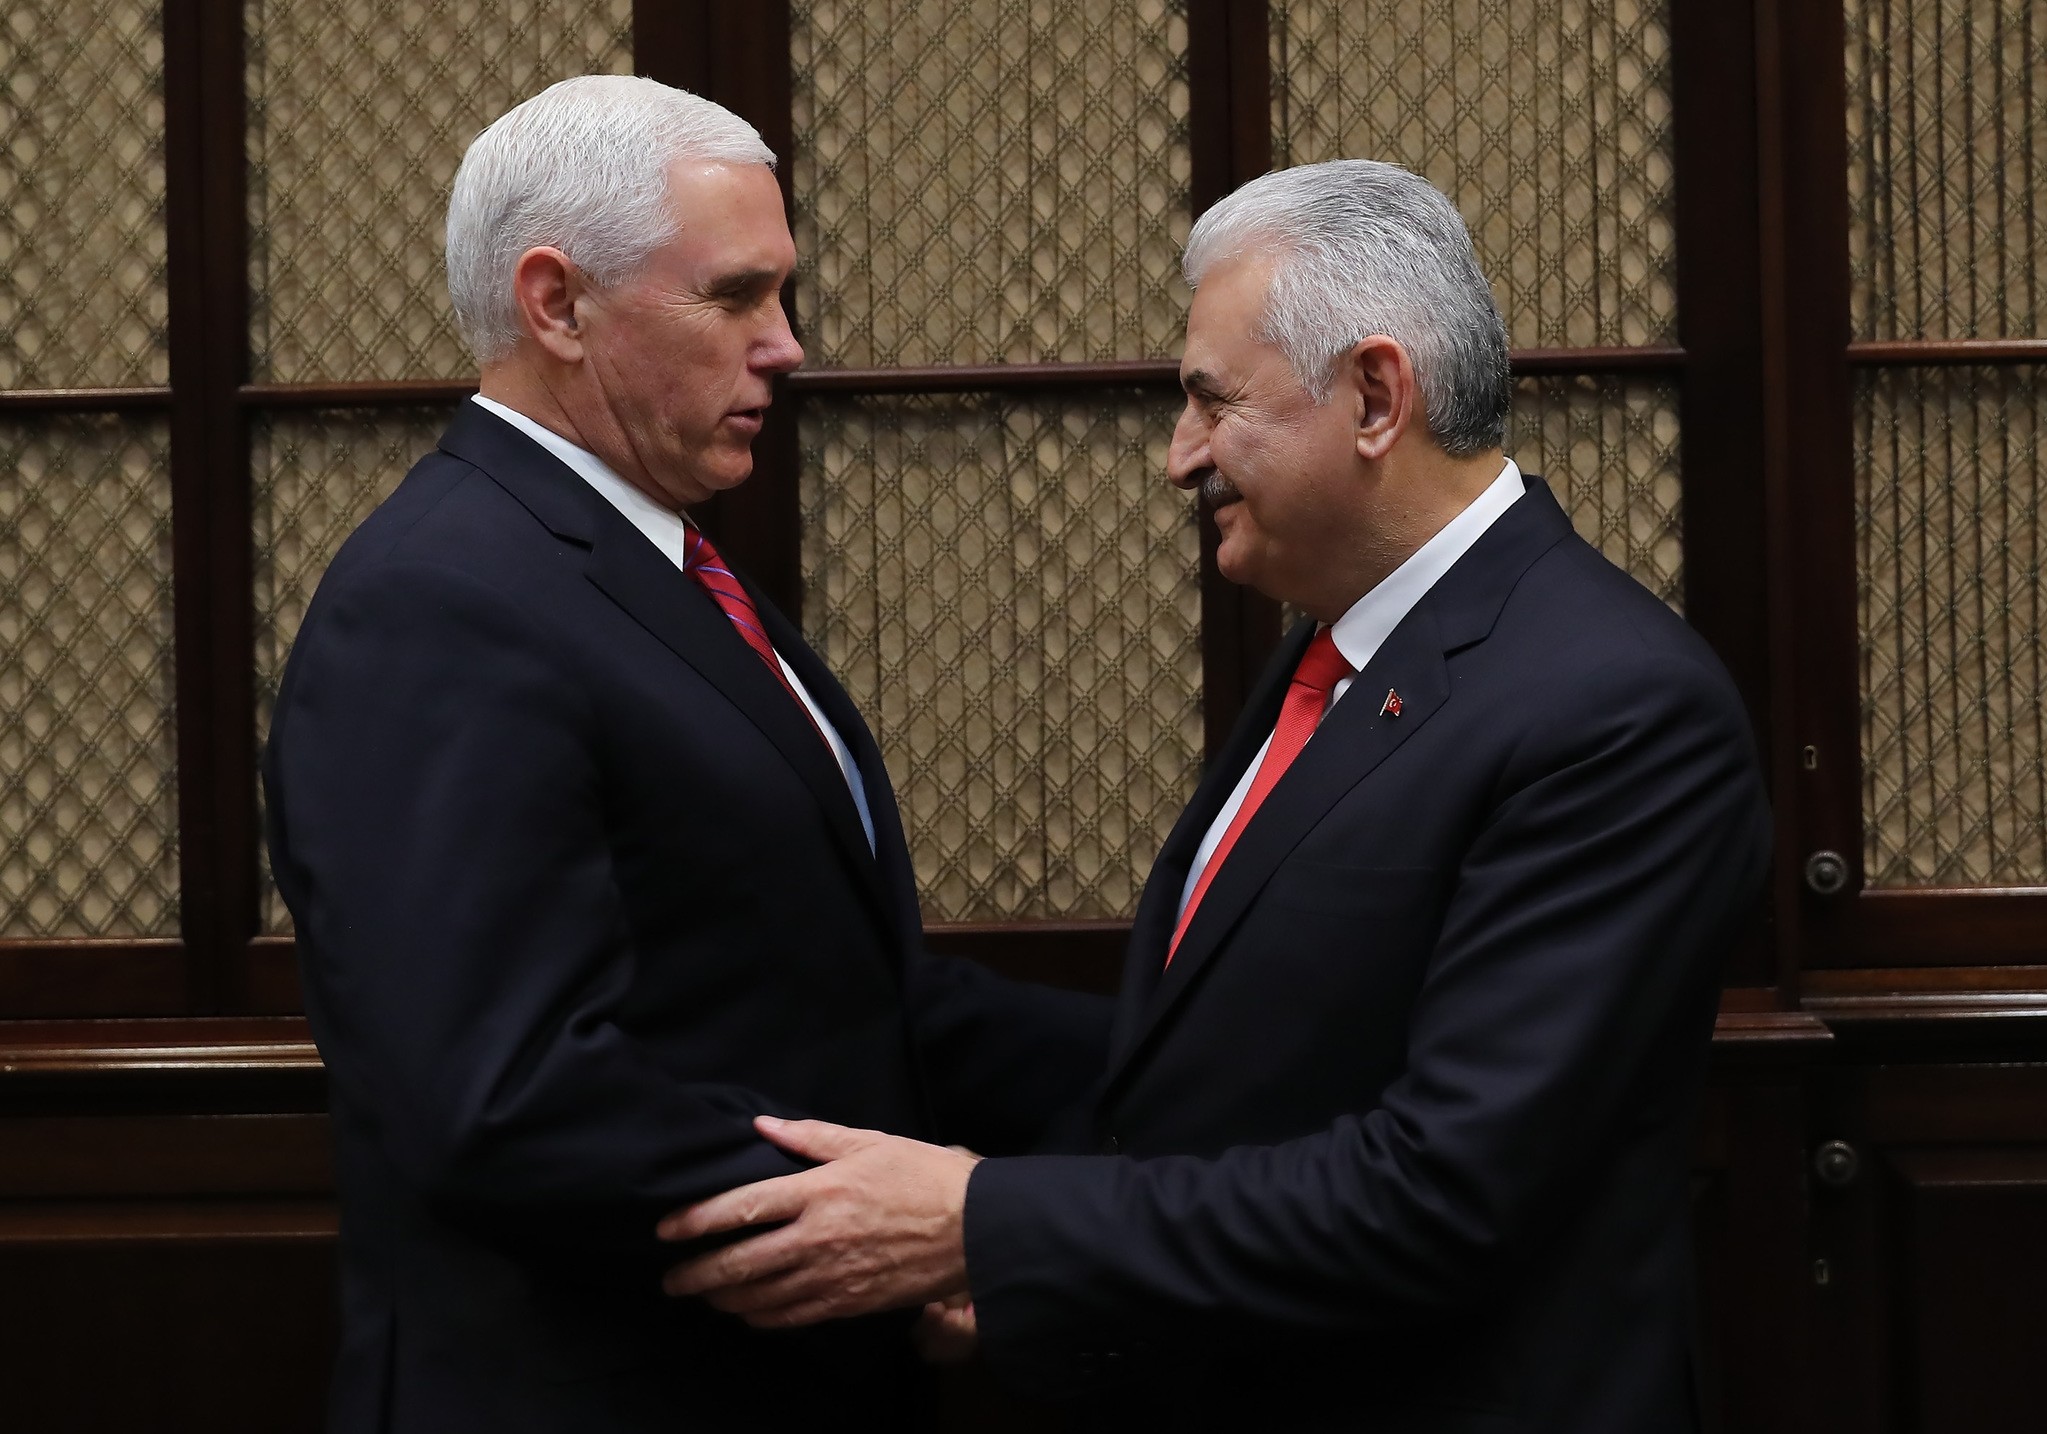 Turkish Prime Minister Binali Yu0131ldu0131ru0131m and U.S. Vice President Mike Pence meet in the Roosevelt Room at the White House in Washington,. (AA Photo)